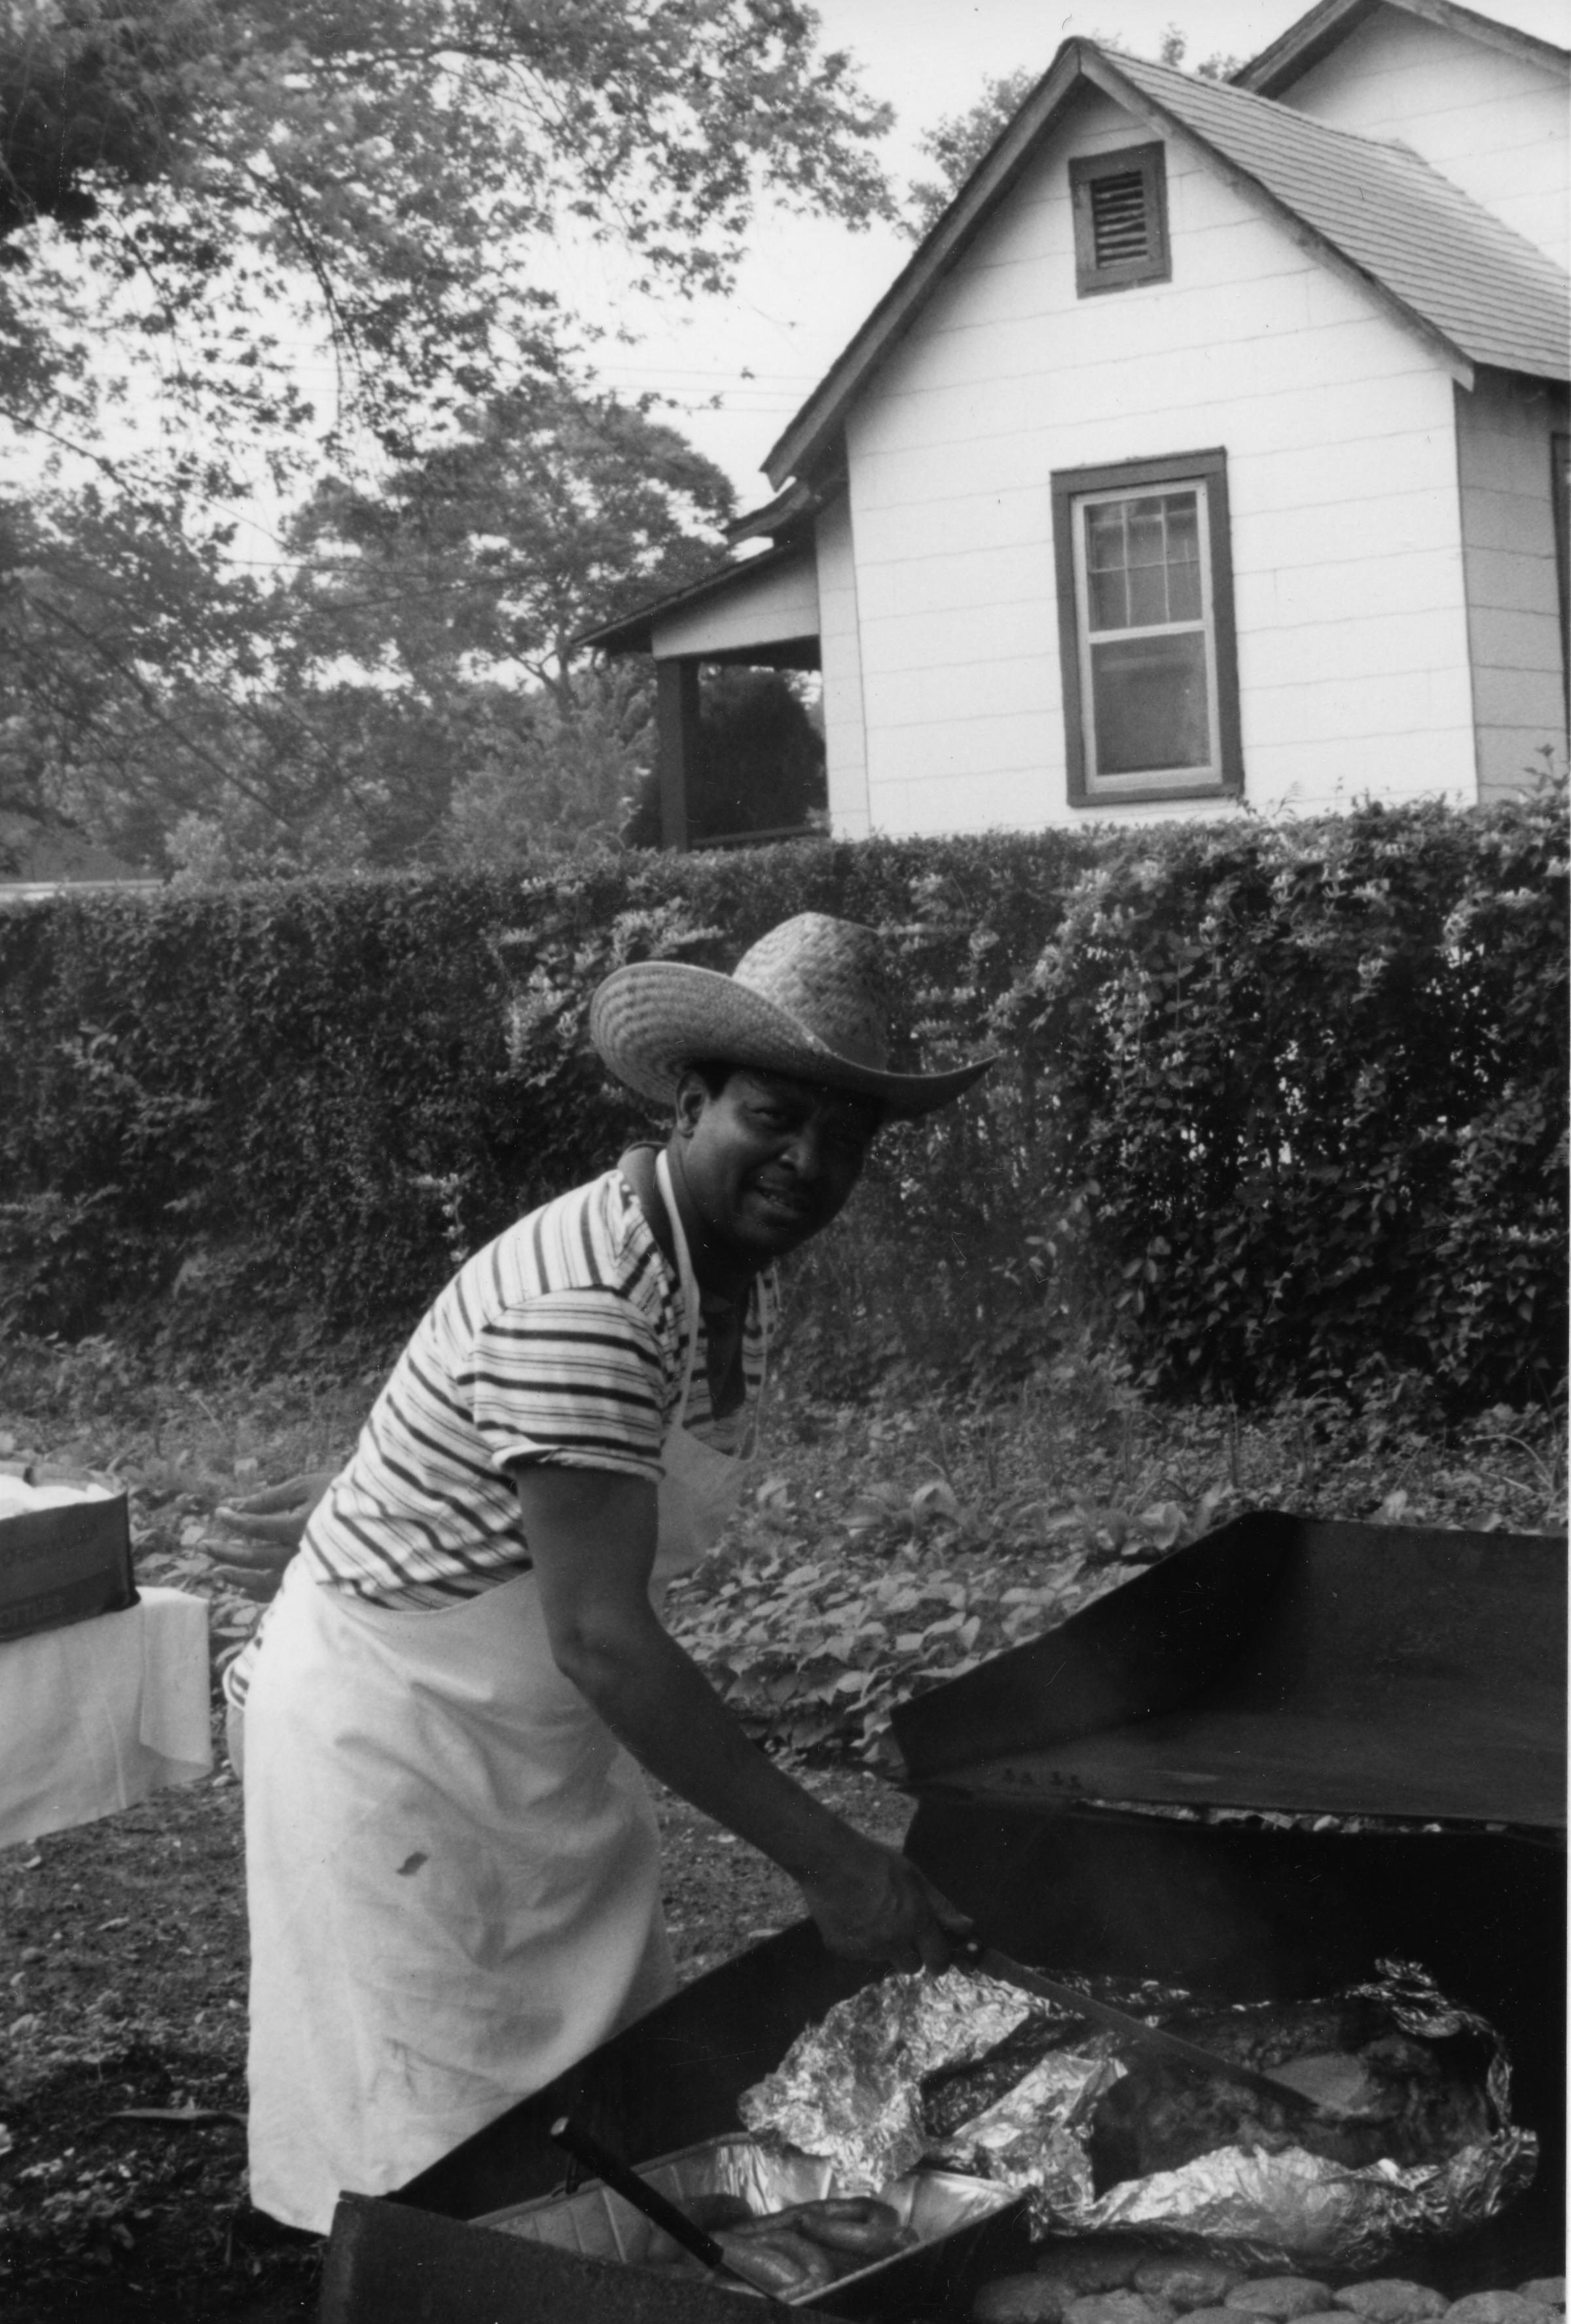 Willie Johnson at his Grill